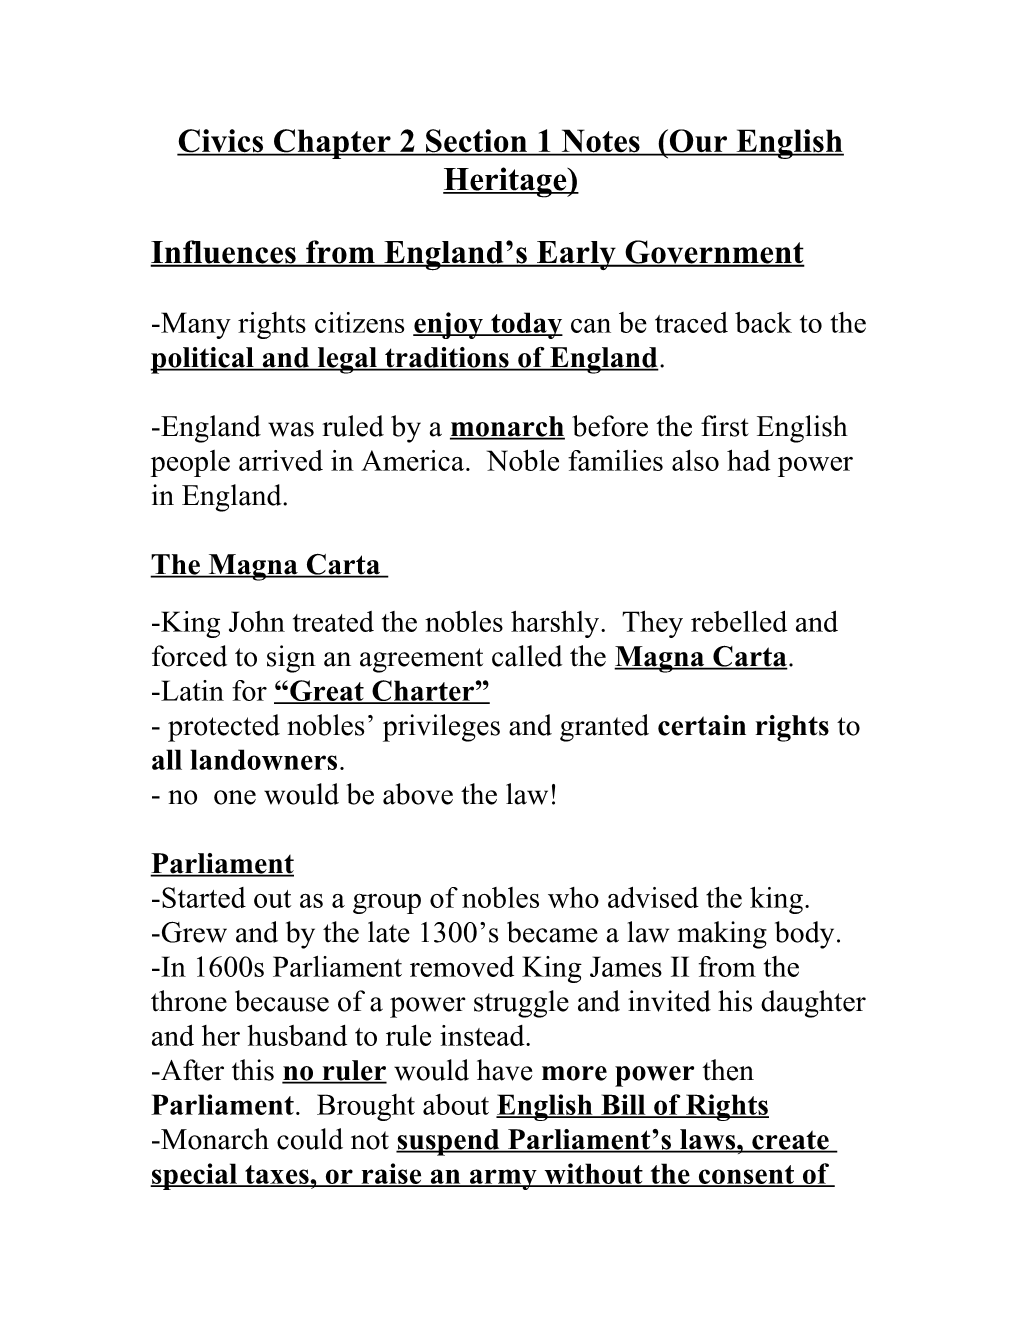 Civics Chapter 2 Section 1 Notes (Our English Heritage)